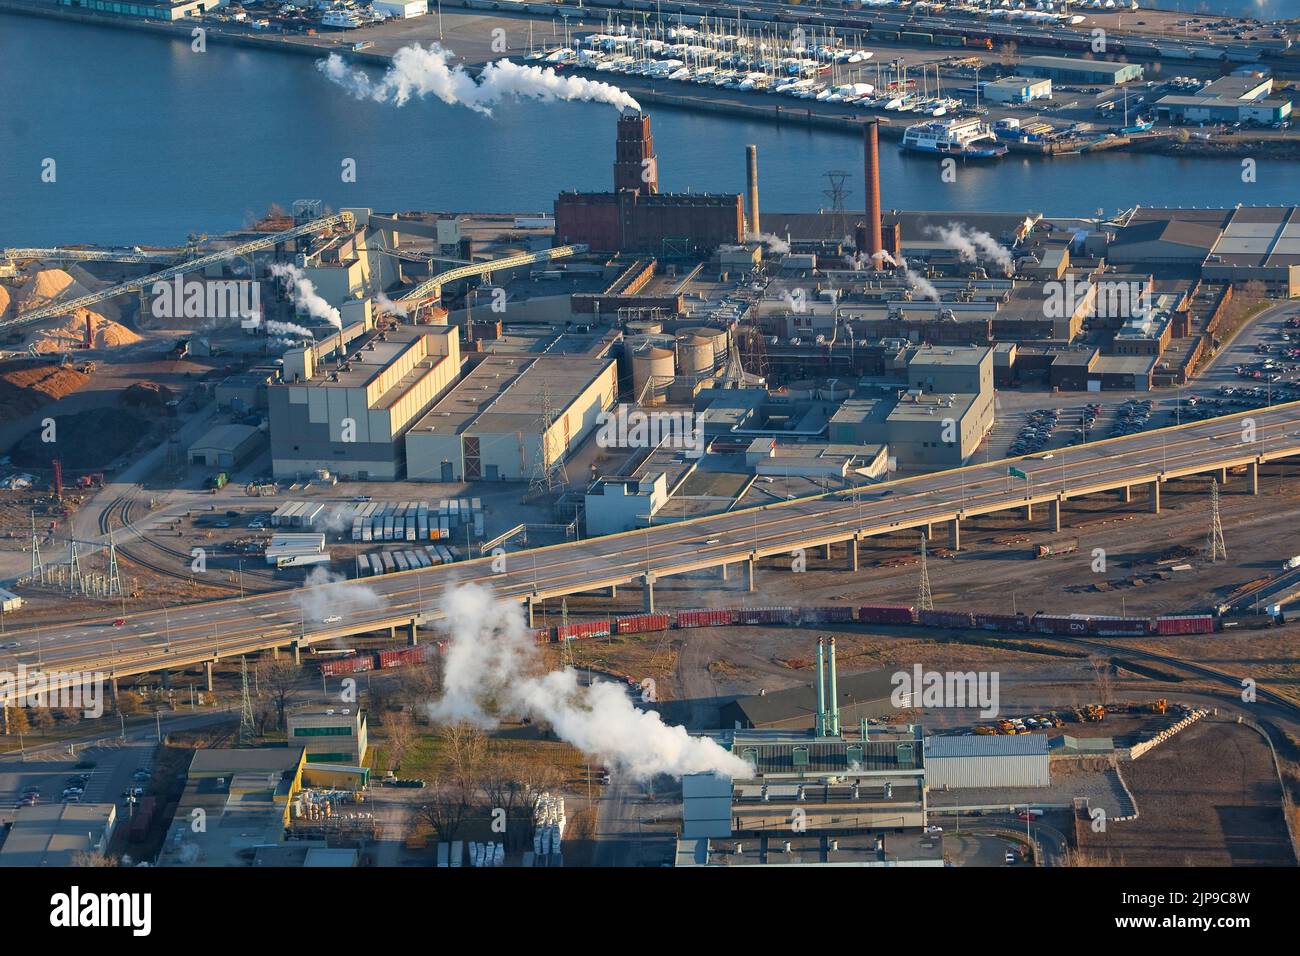 Papiers Stadacona paper mill in Quebec city is pictured in this aerial photo November 11, 2009. Owned by White Birch Paper, the five paper machines at Stadacona have the capability of producing more than 400,000 tons of newsprint, 80,000 tons of directory stock and 45,000 tons of paperboard packaging and multi-ply uncoated specialty grade paper. Stock Photo